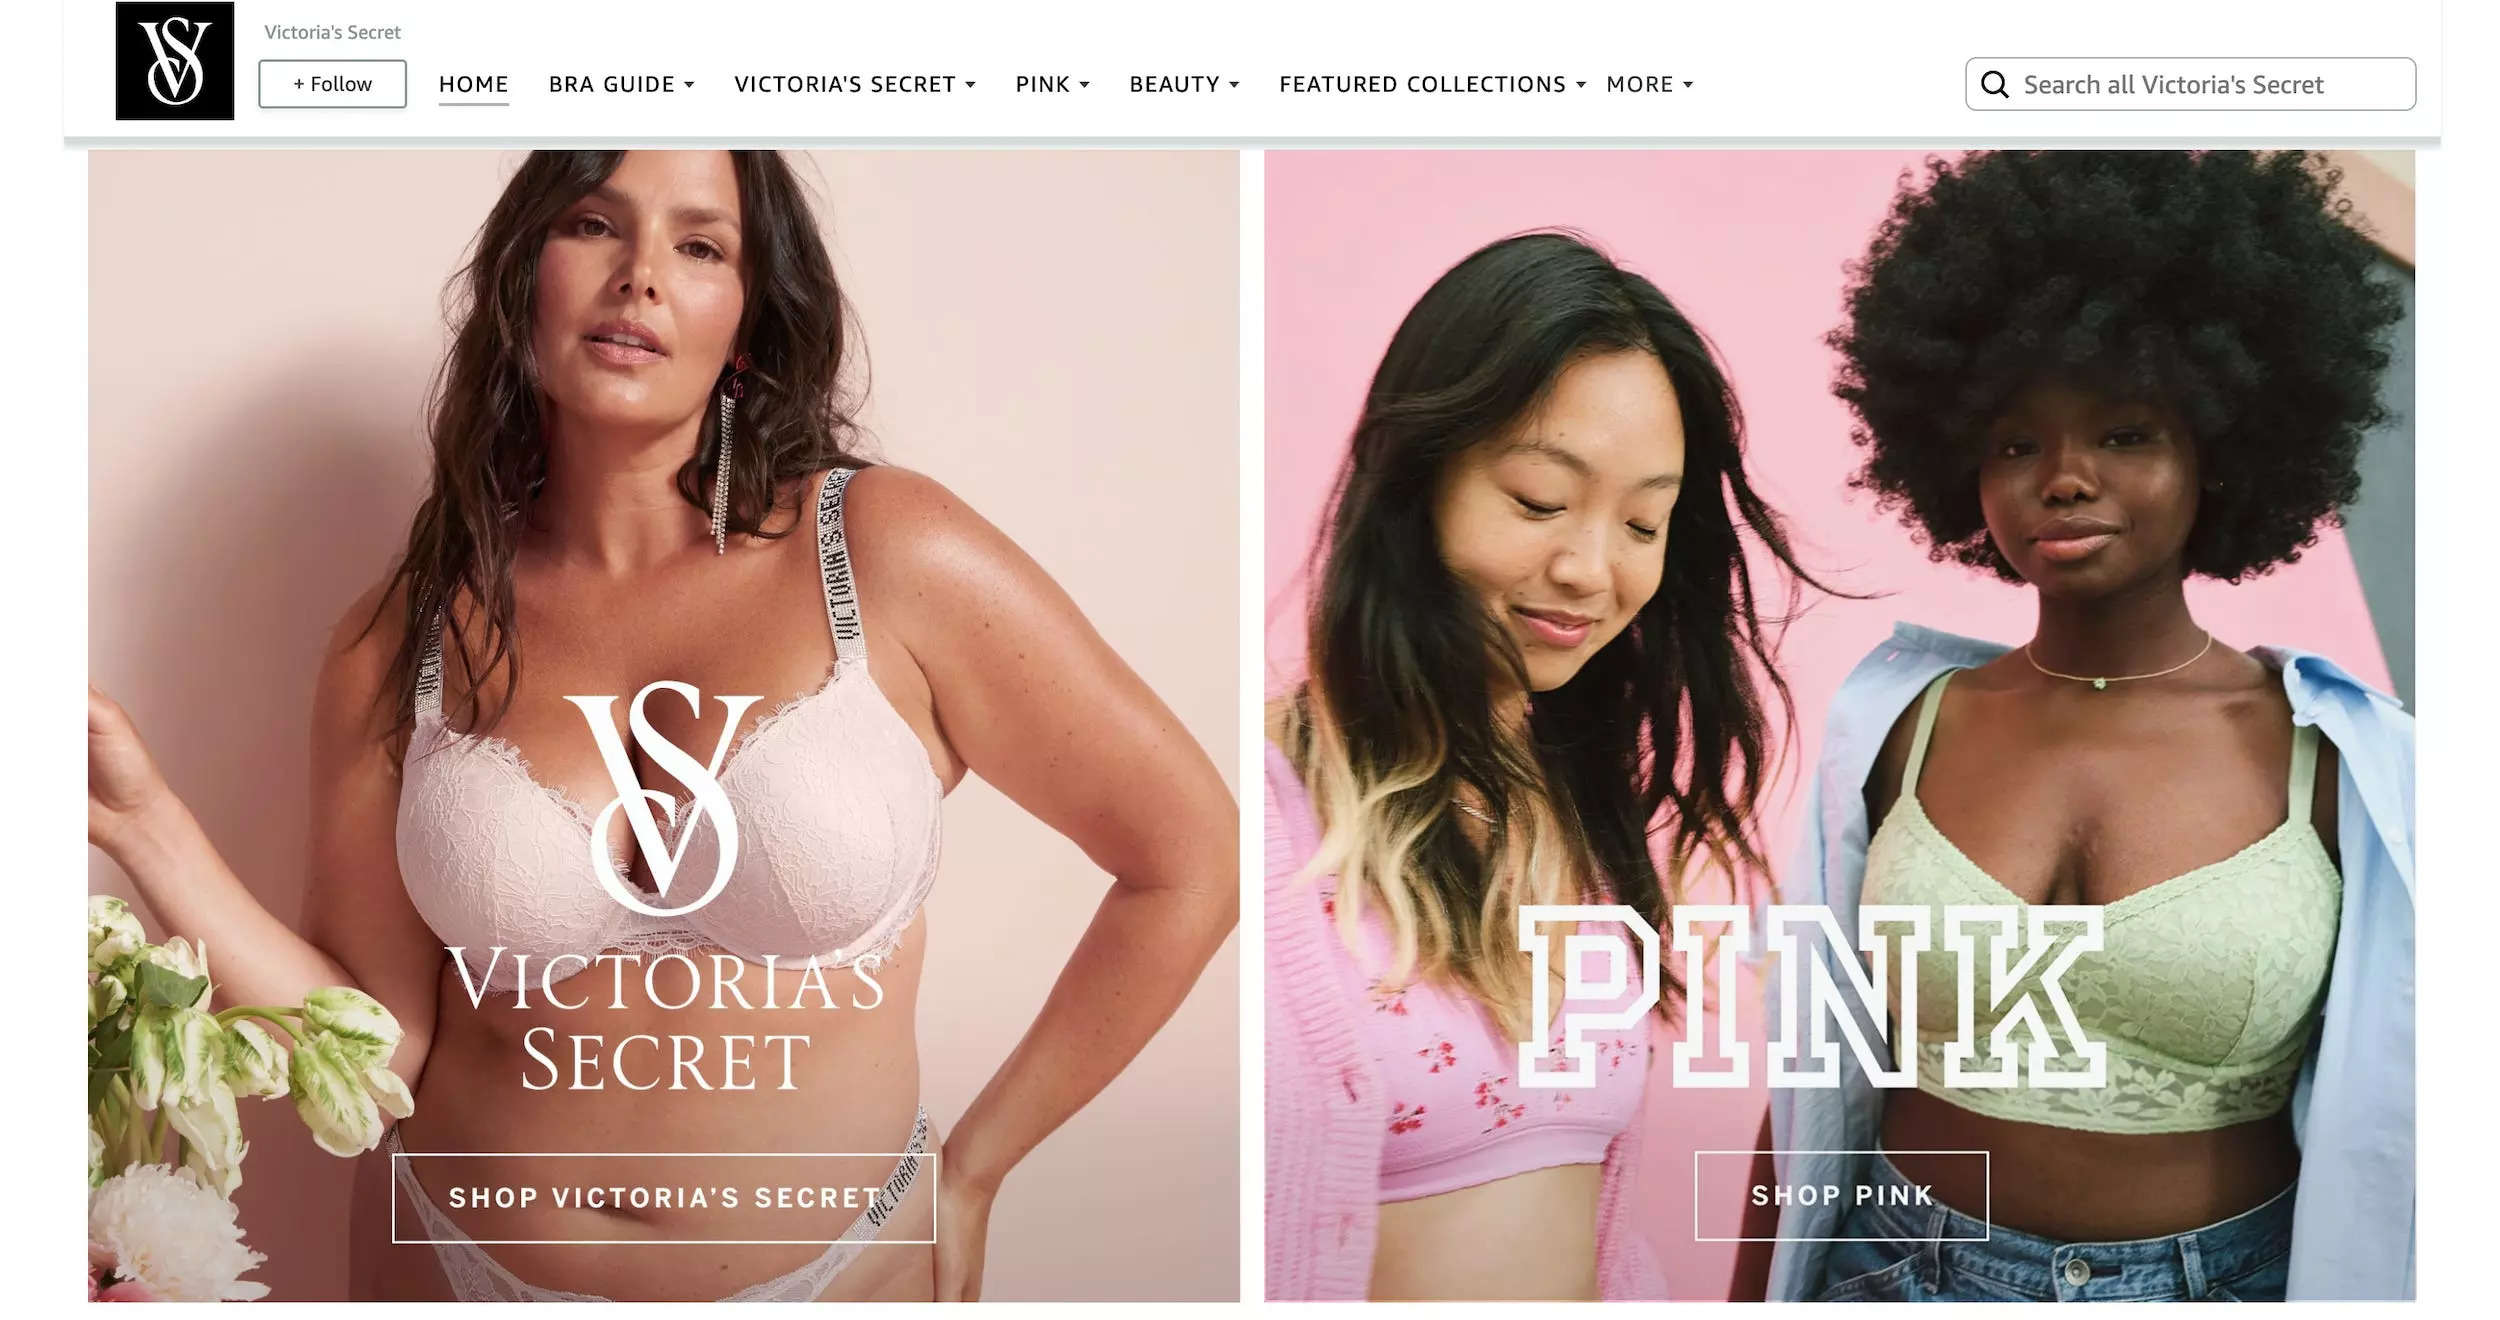 You can now buy Victoria's Secret underwear on